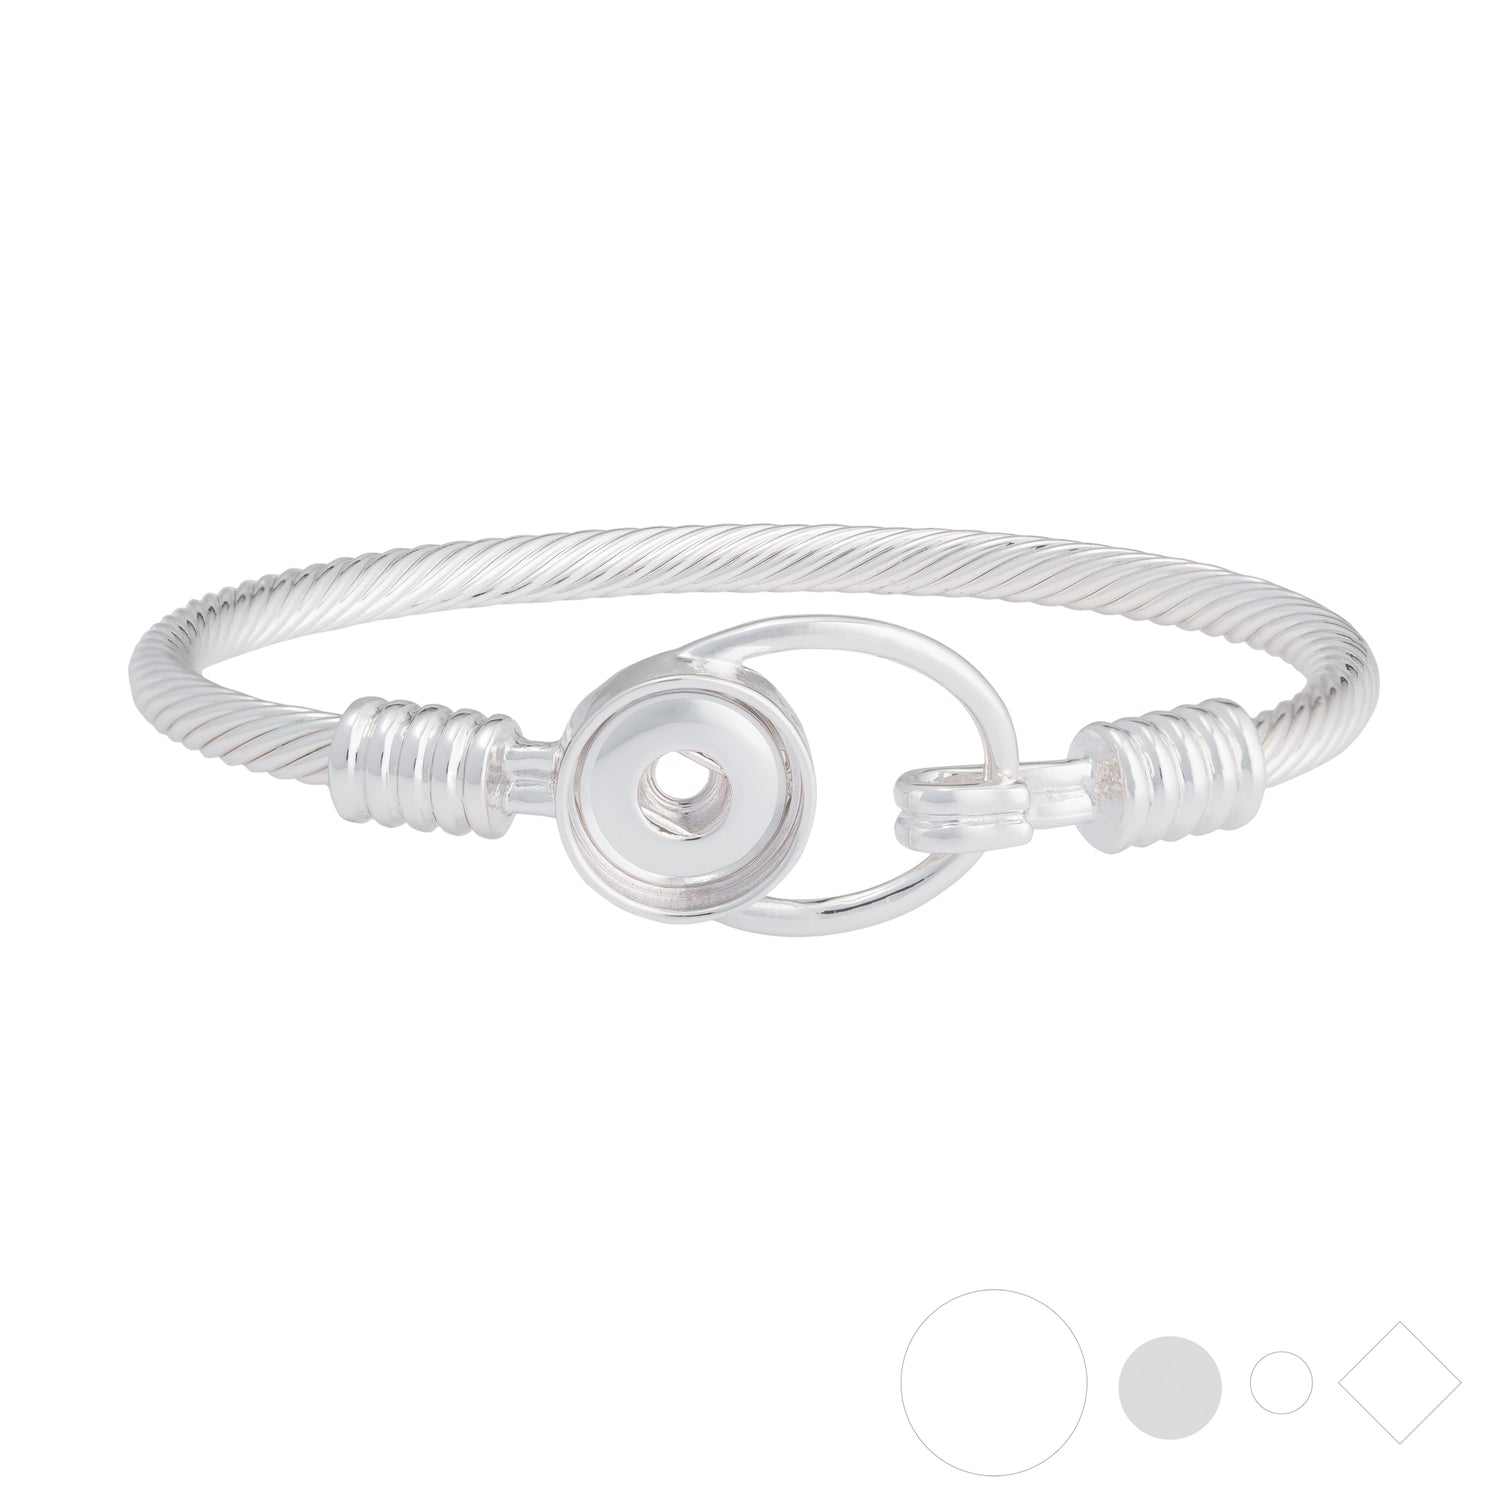 Silver bange bracelets with interchangeable snap jewelry